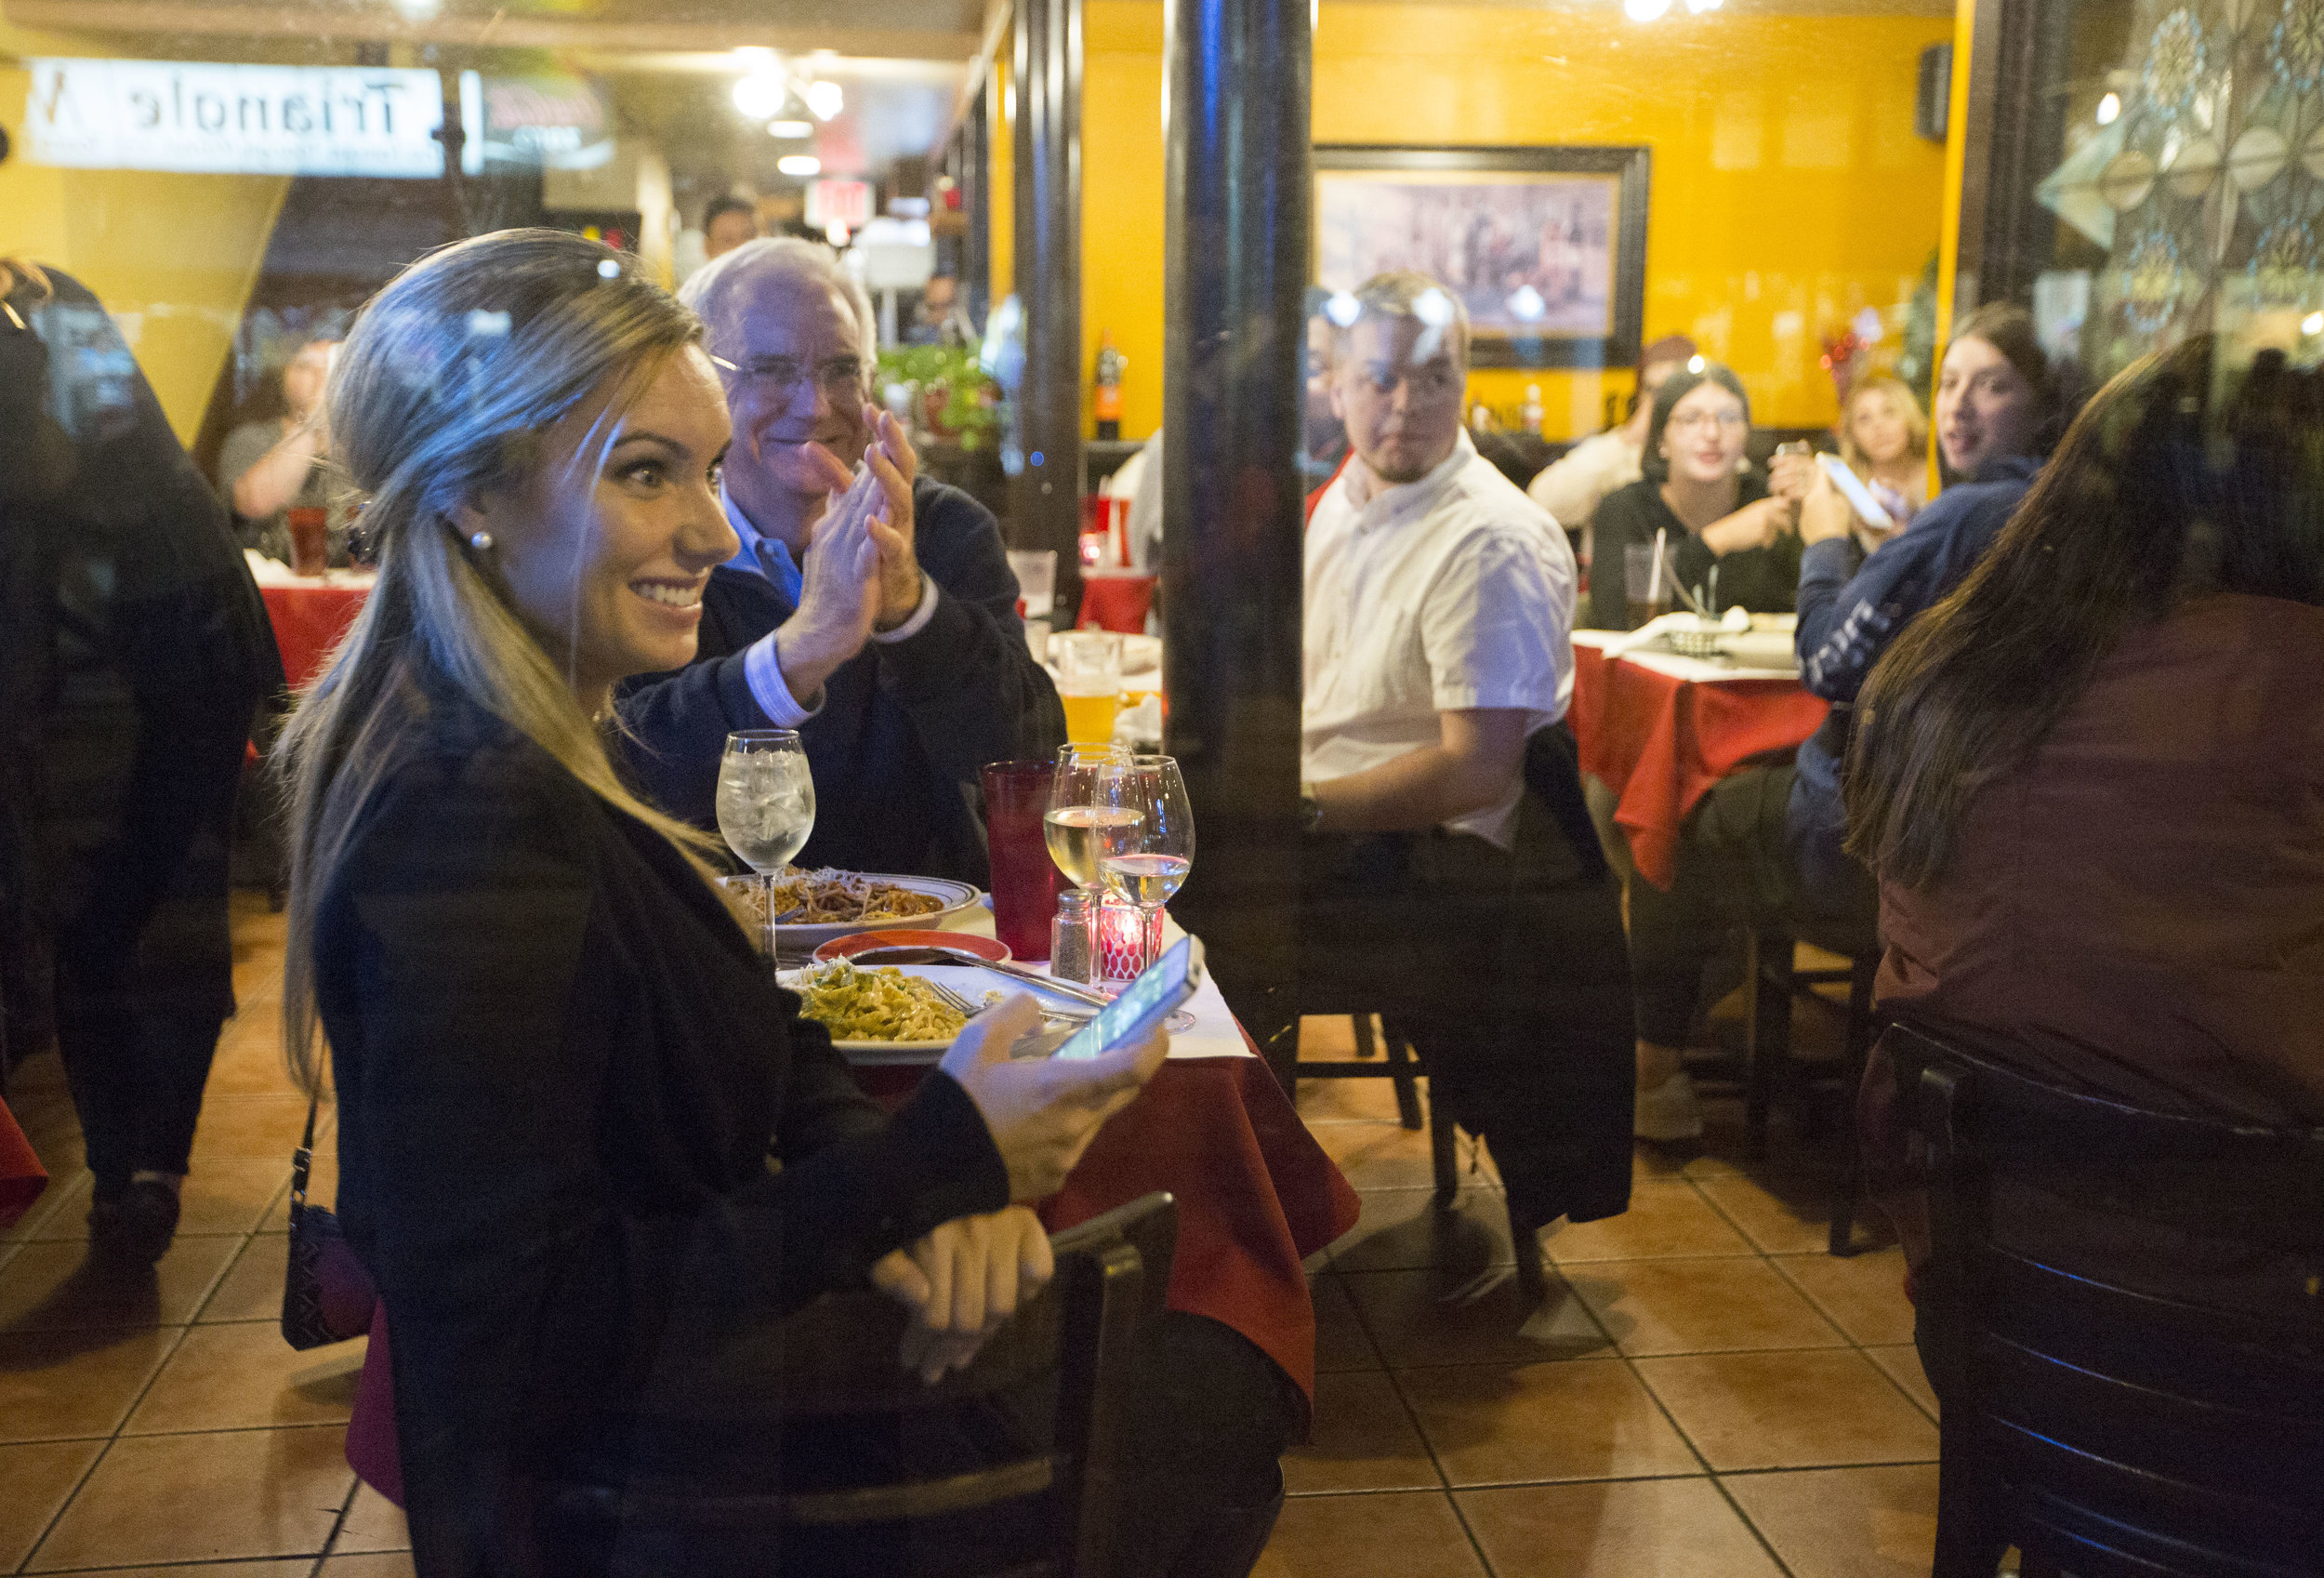  Onlookers inside a restaurant on State Street cheer for the protesters outside during an anti-Trump rally on Nov 10, 2016 in Madison, WI. 